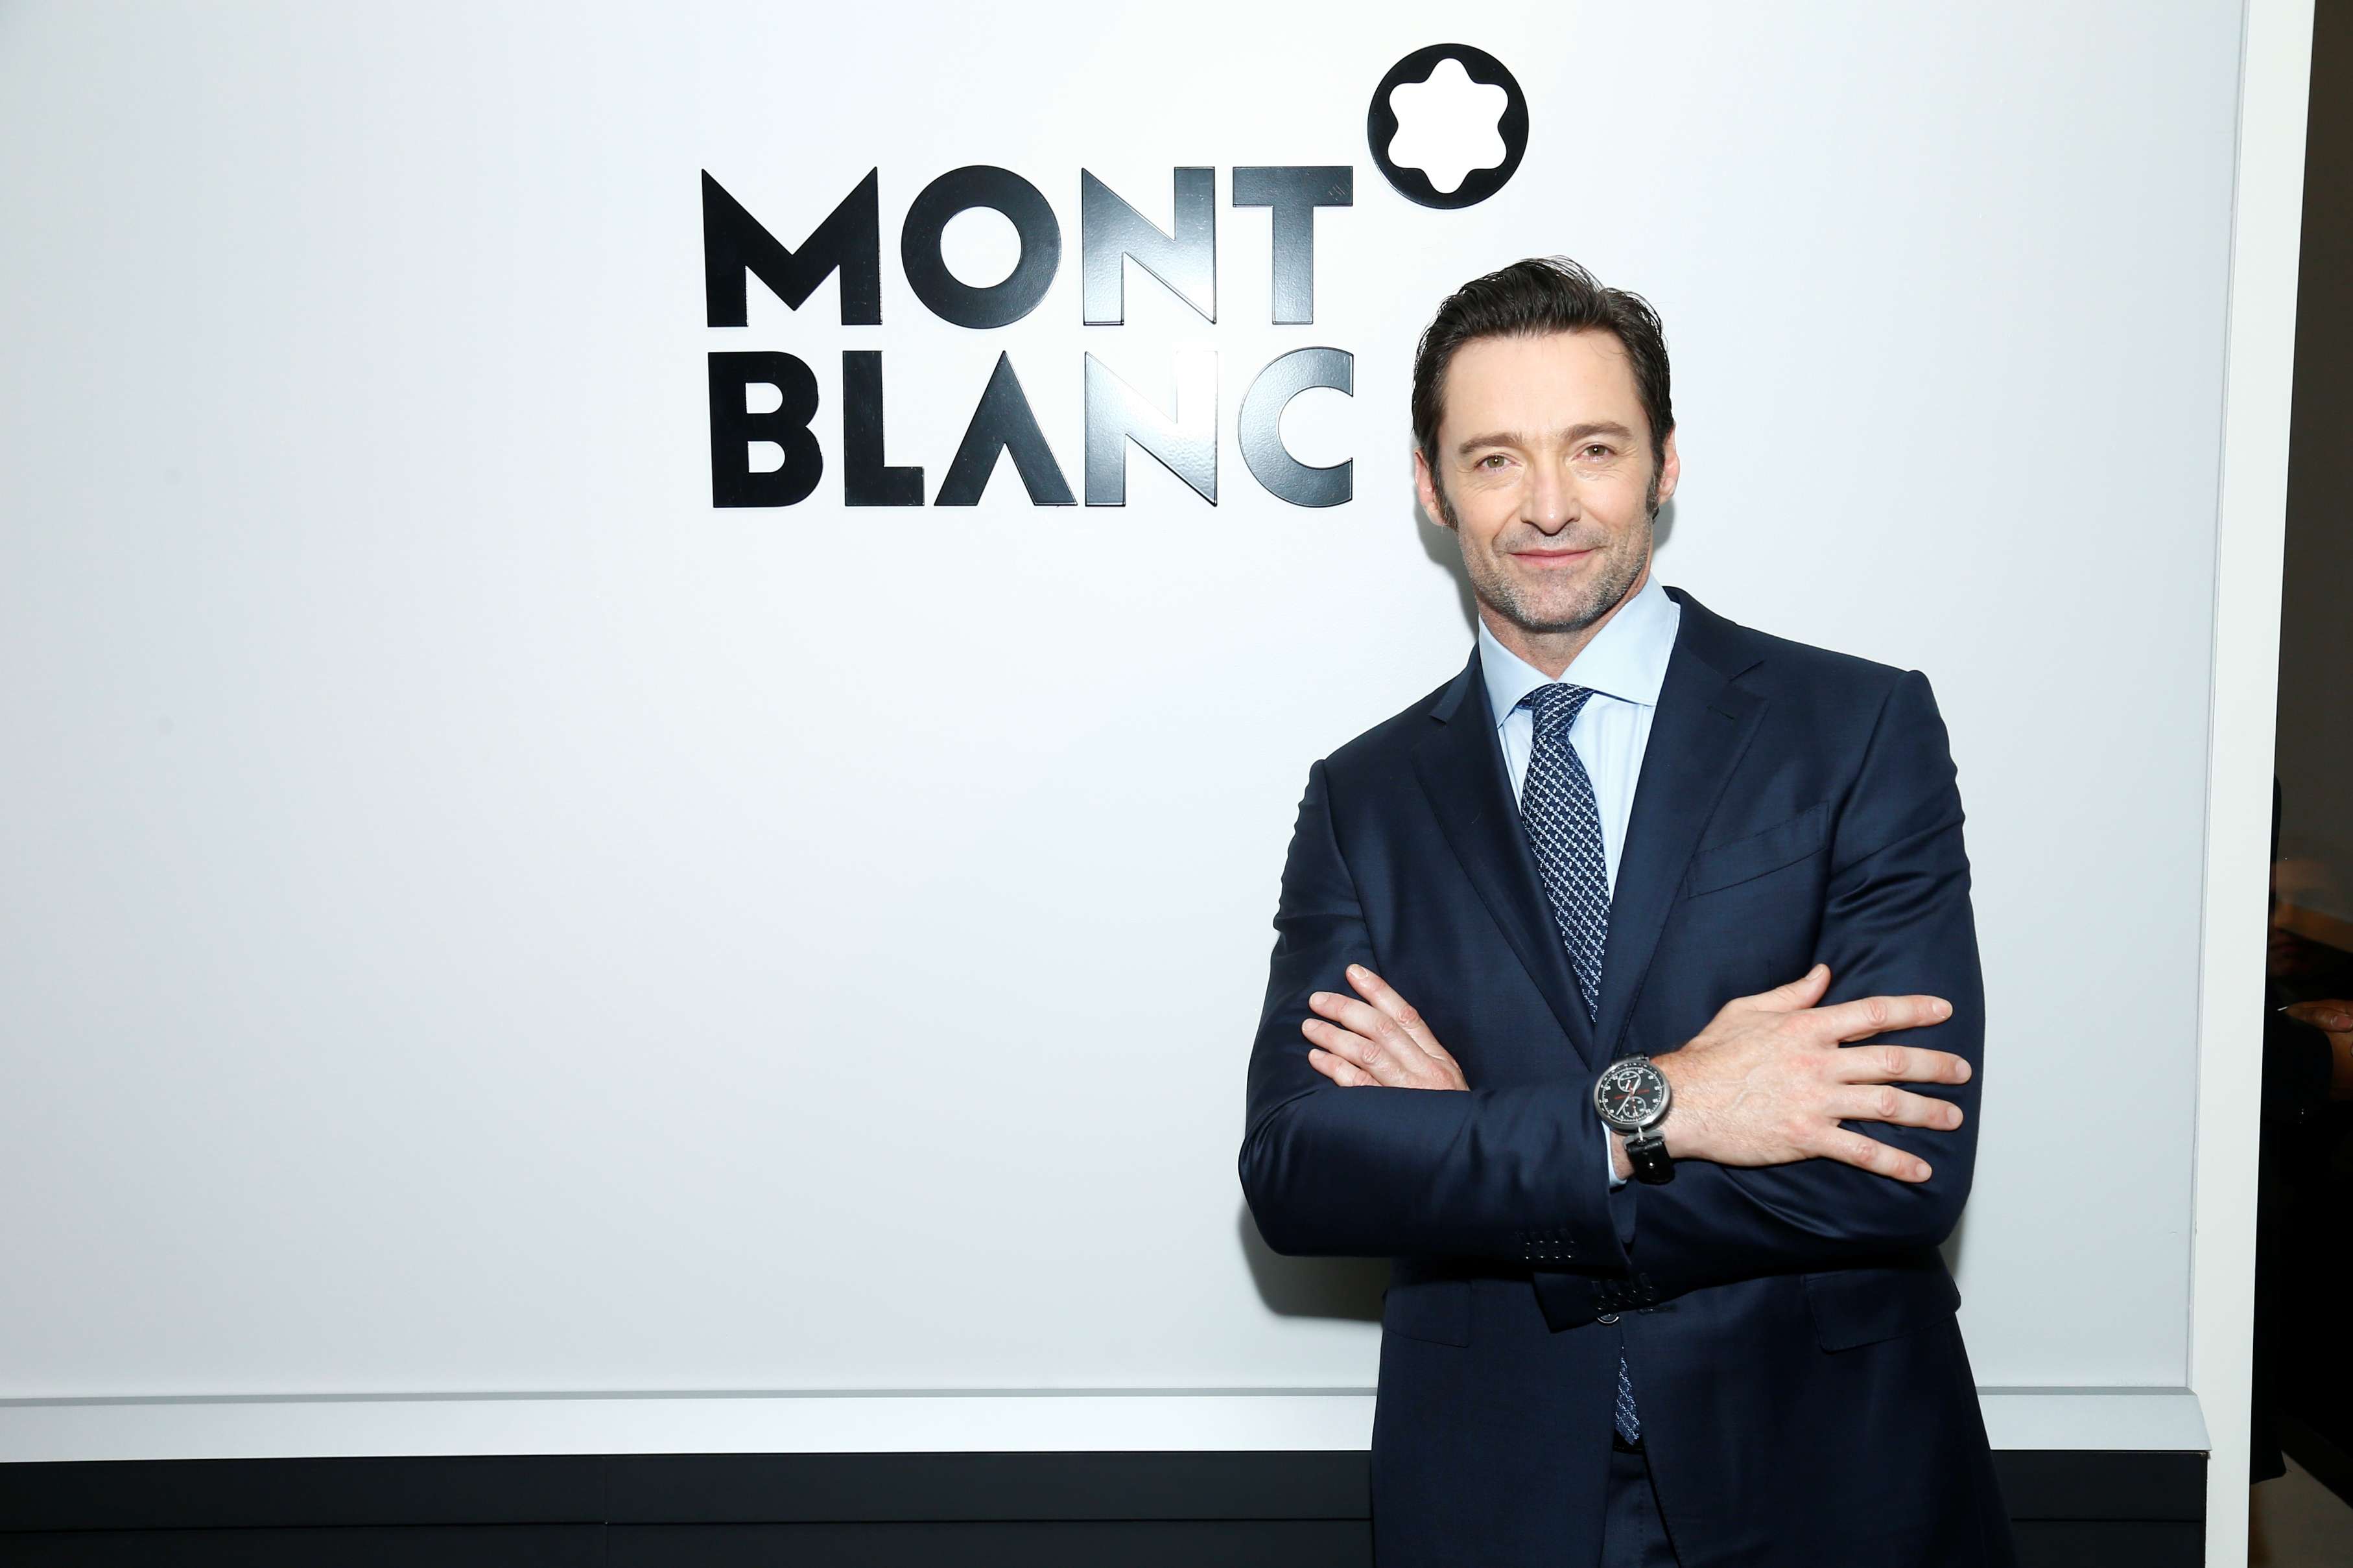 Hugh Jackman wearing the TimeWalker Chronograph at the Montblanc SIHH 2017 press conference